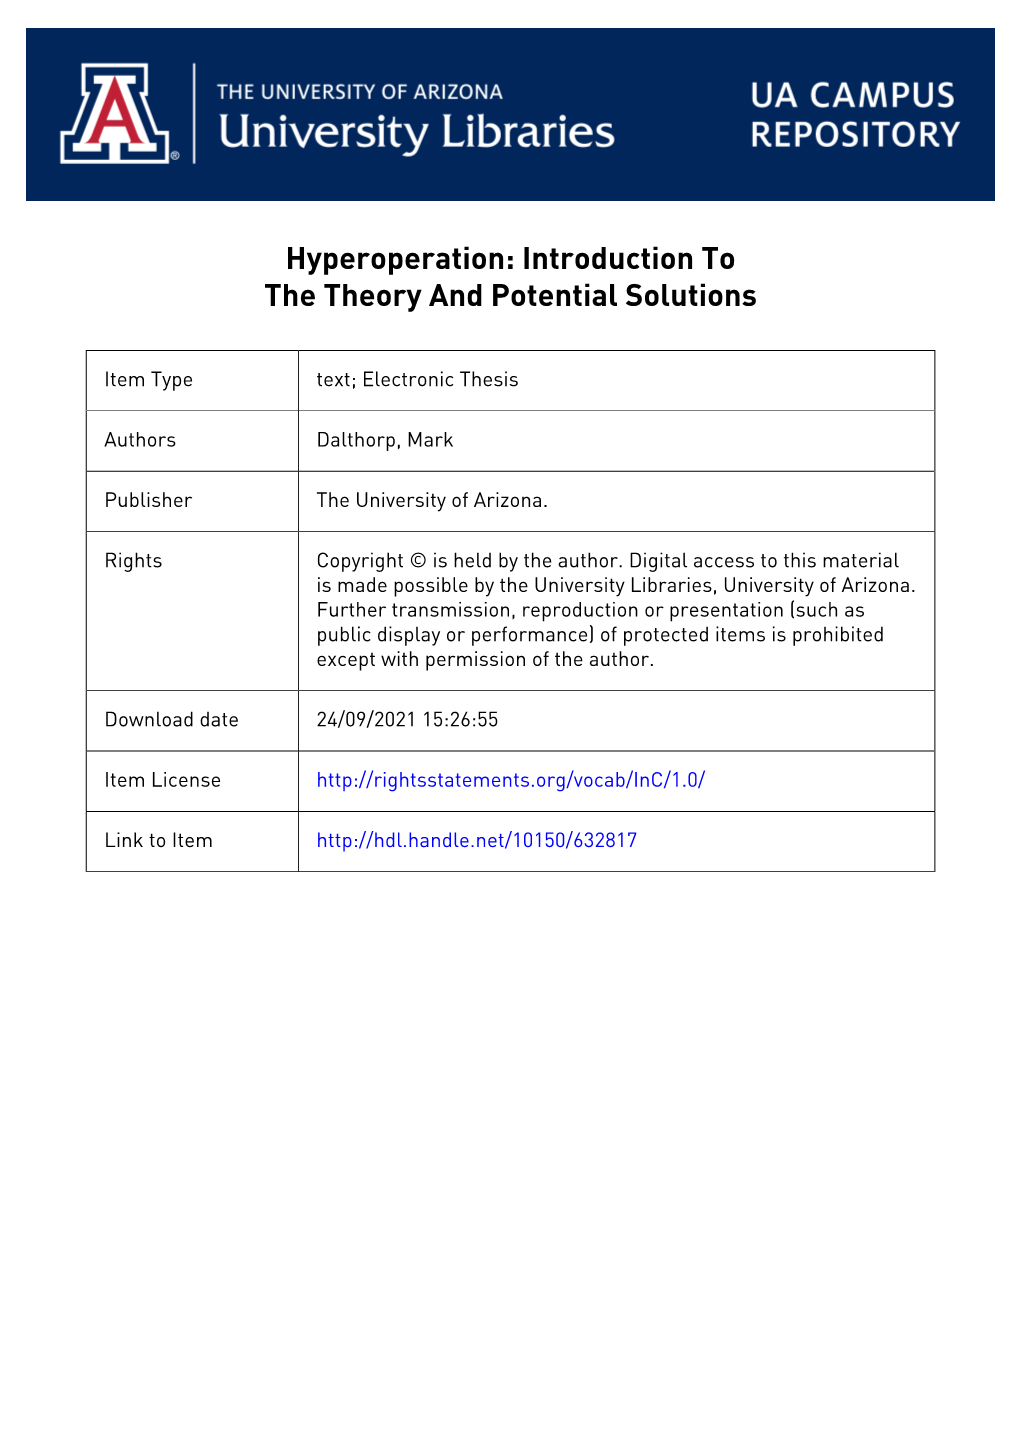 Hyperoperation: Introduction to the Theory and Potential Solutions